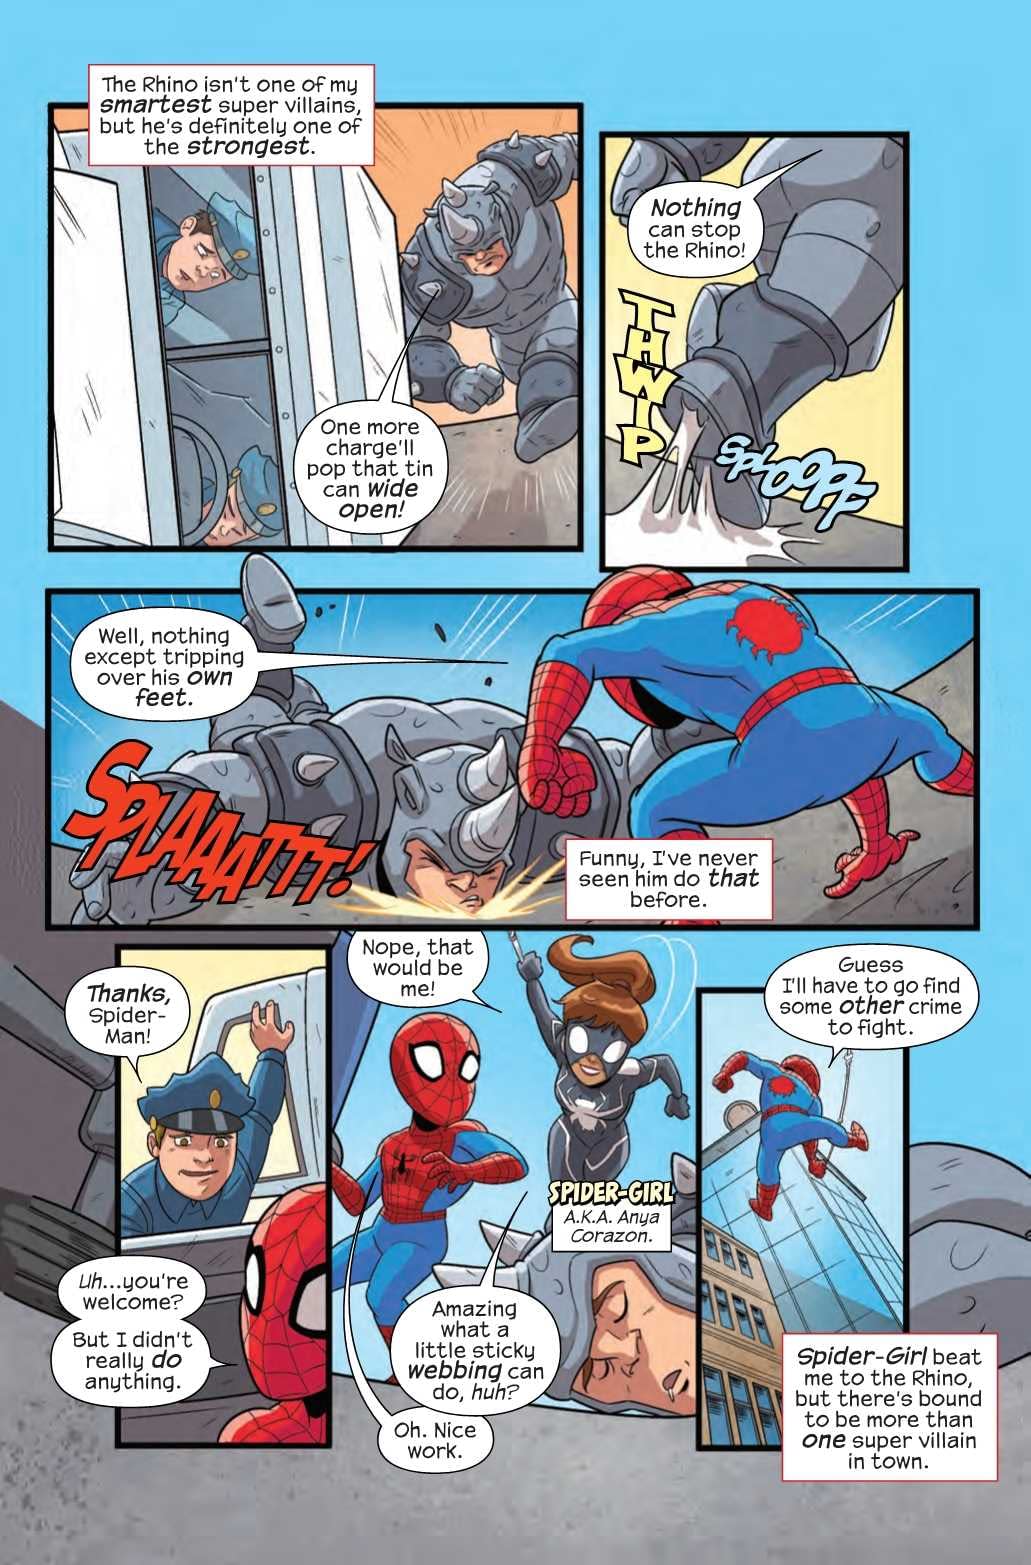 The Return of the Funny Pages in  Next Week's MSA Spider-Man Web of Intrigue #1